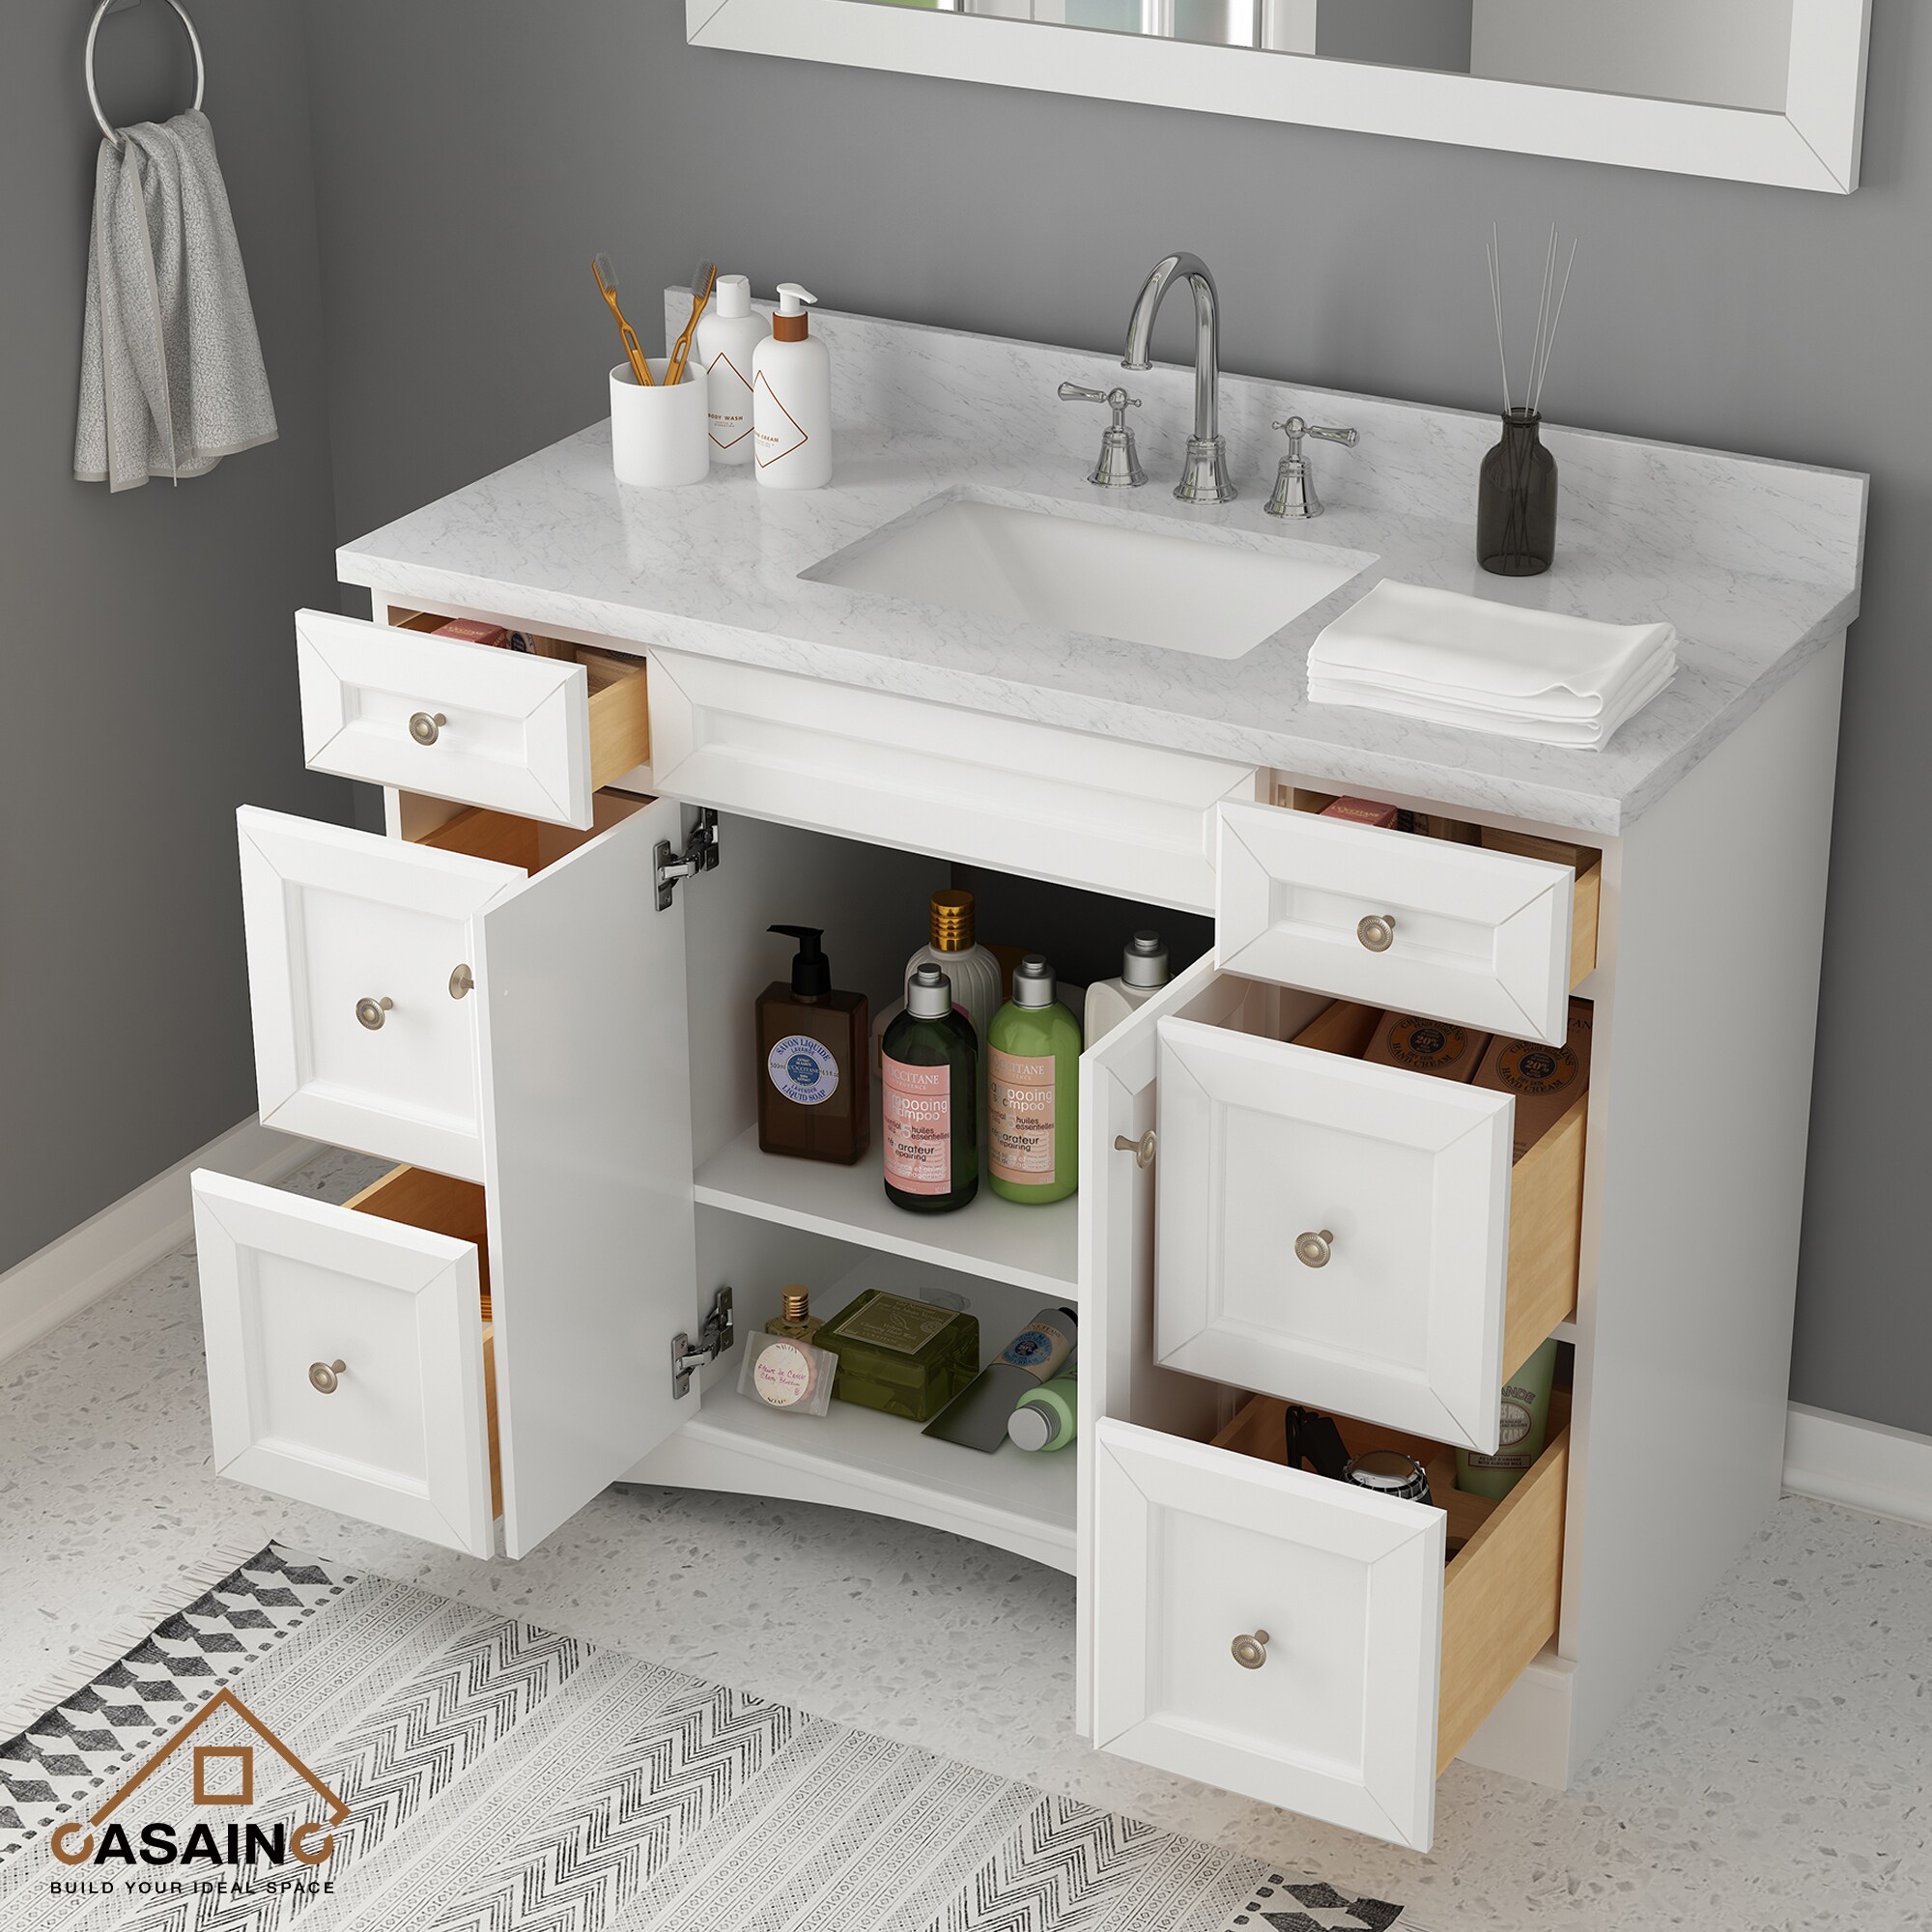 Casainc 48 In White Undermount Single Sink Bathroom Vanity With Off White With Speckles Marble 2614